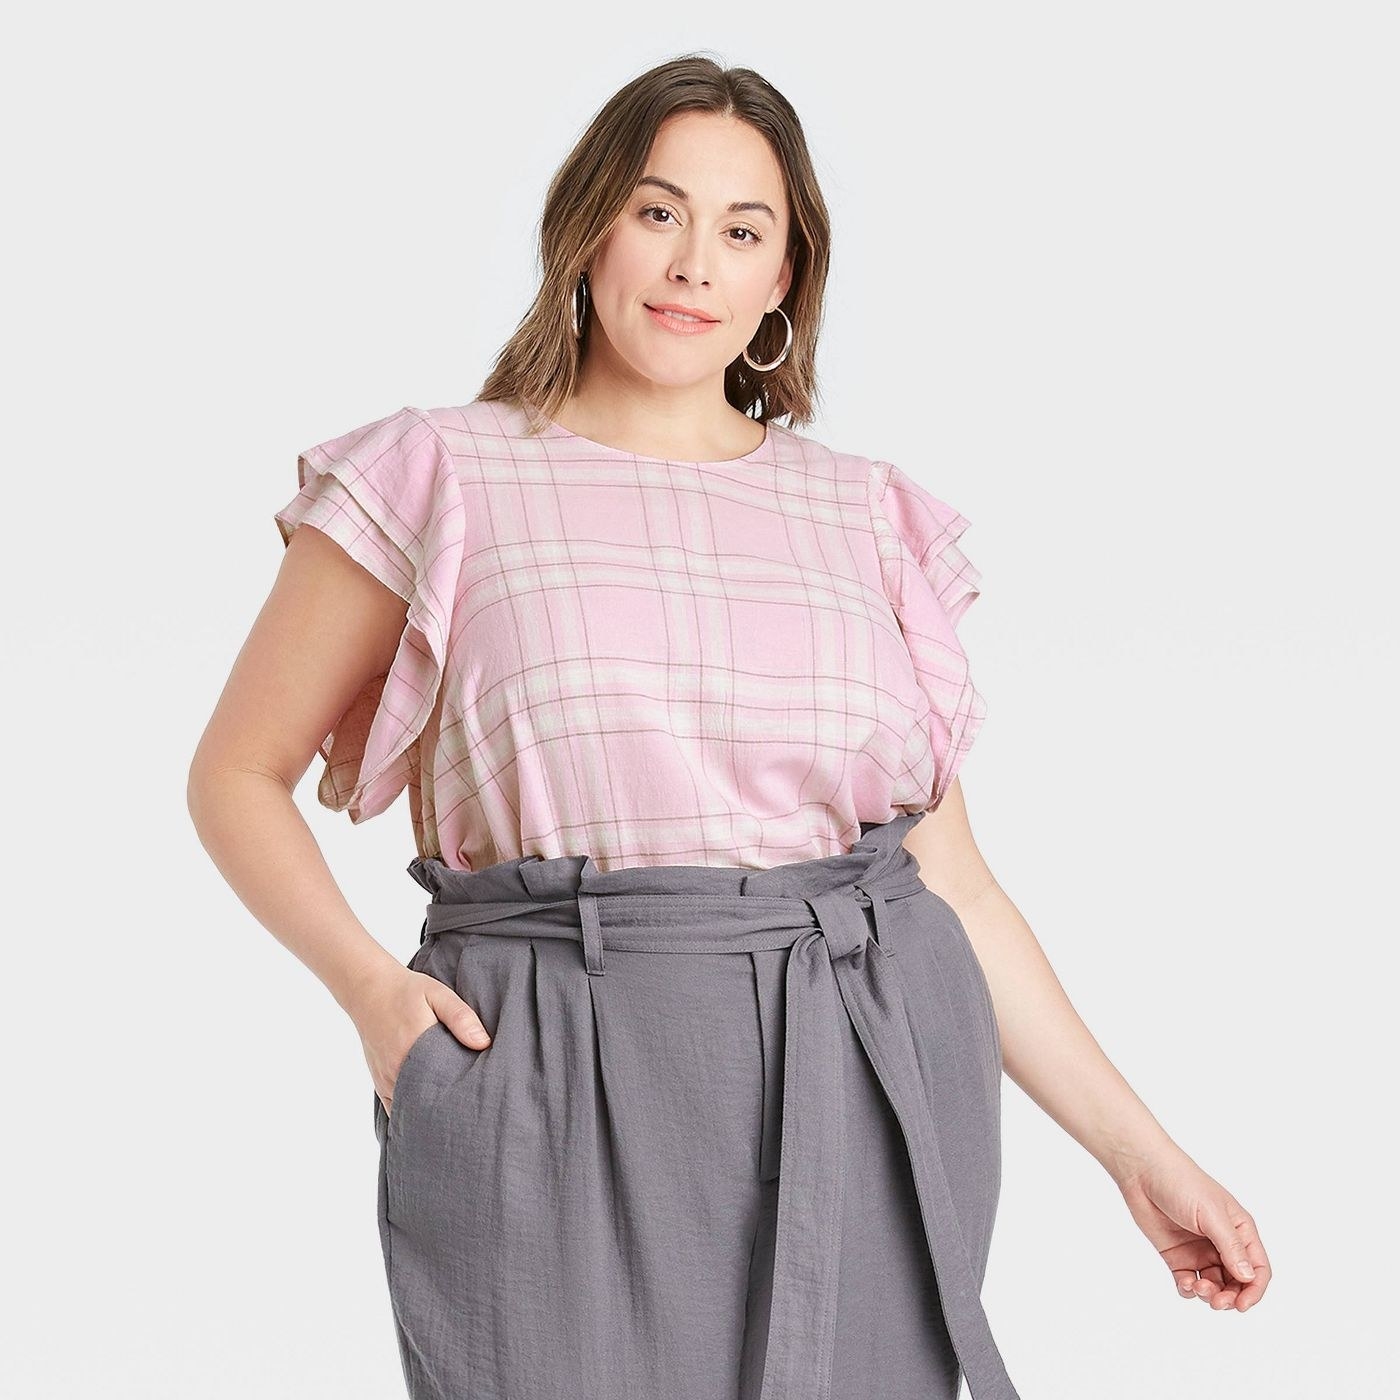 a model wearing the pink plaid top and gray pants